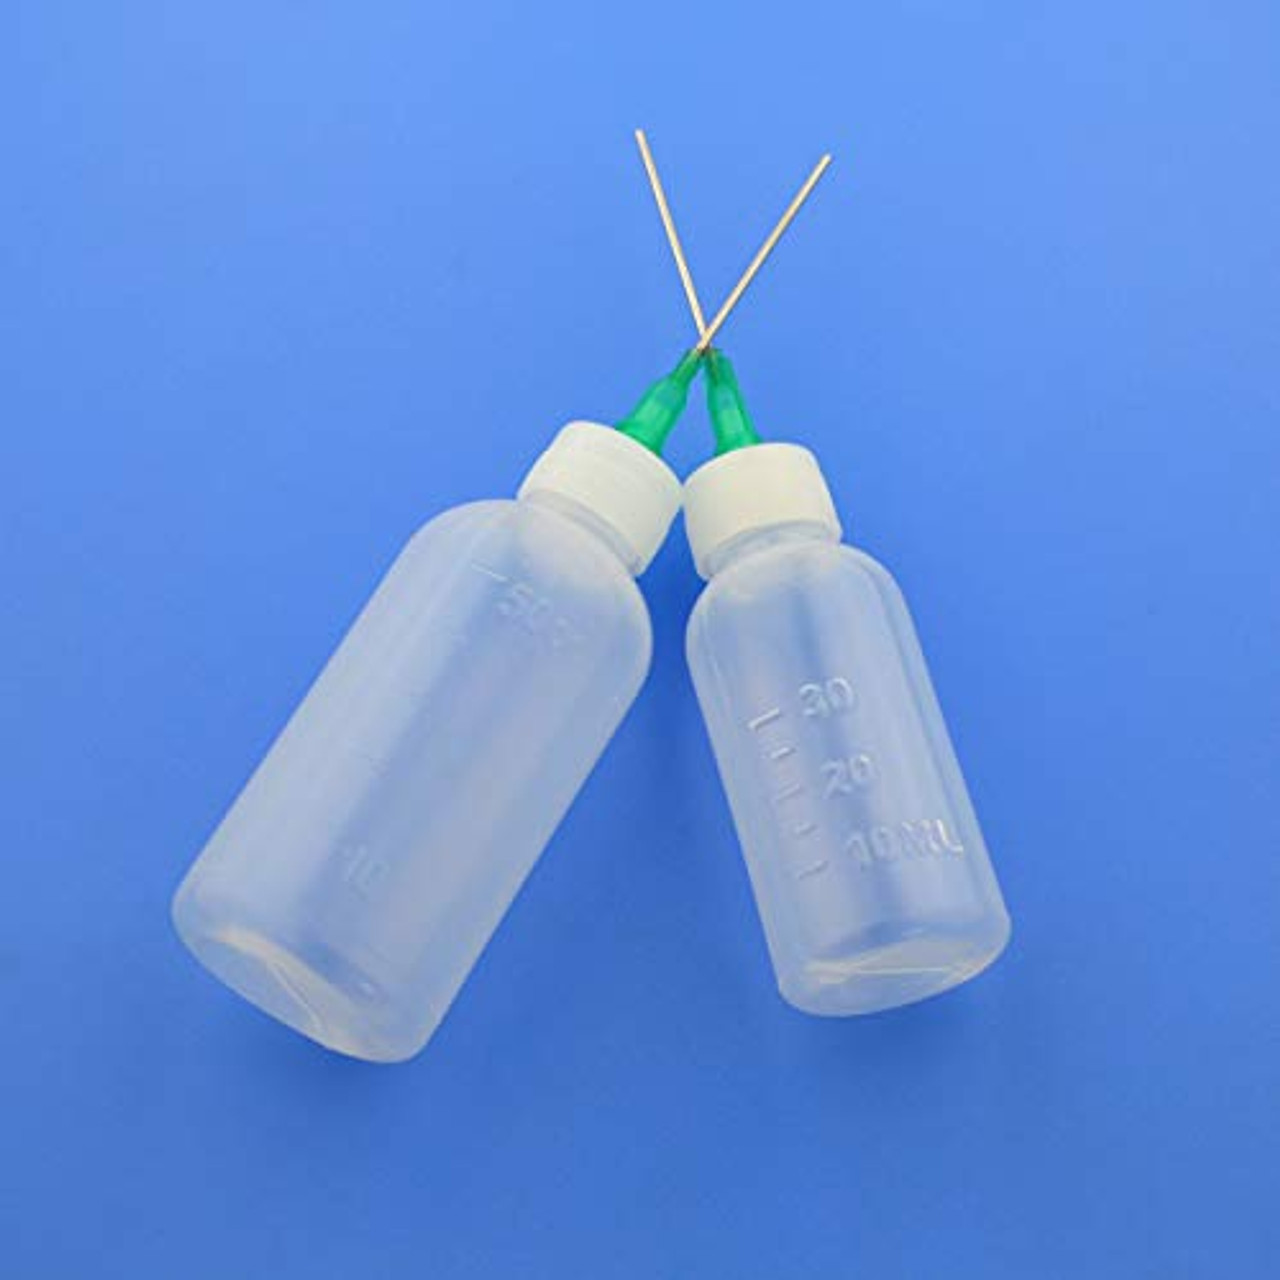 30Milliliter Precision Applicator Bottle with Blunt Tip Needle and Cap